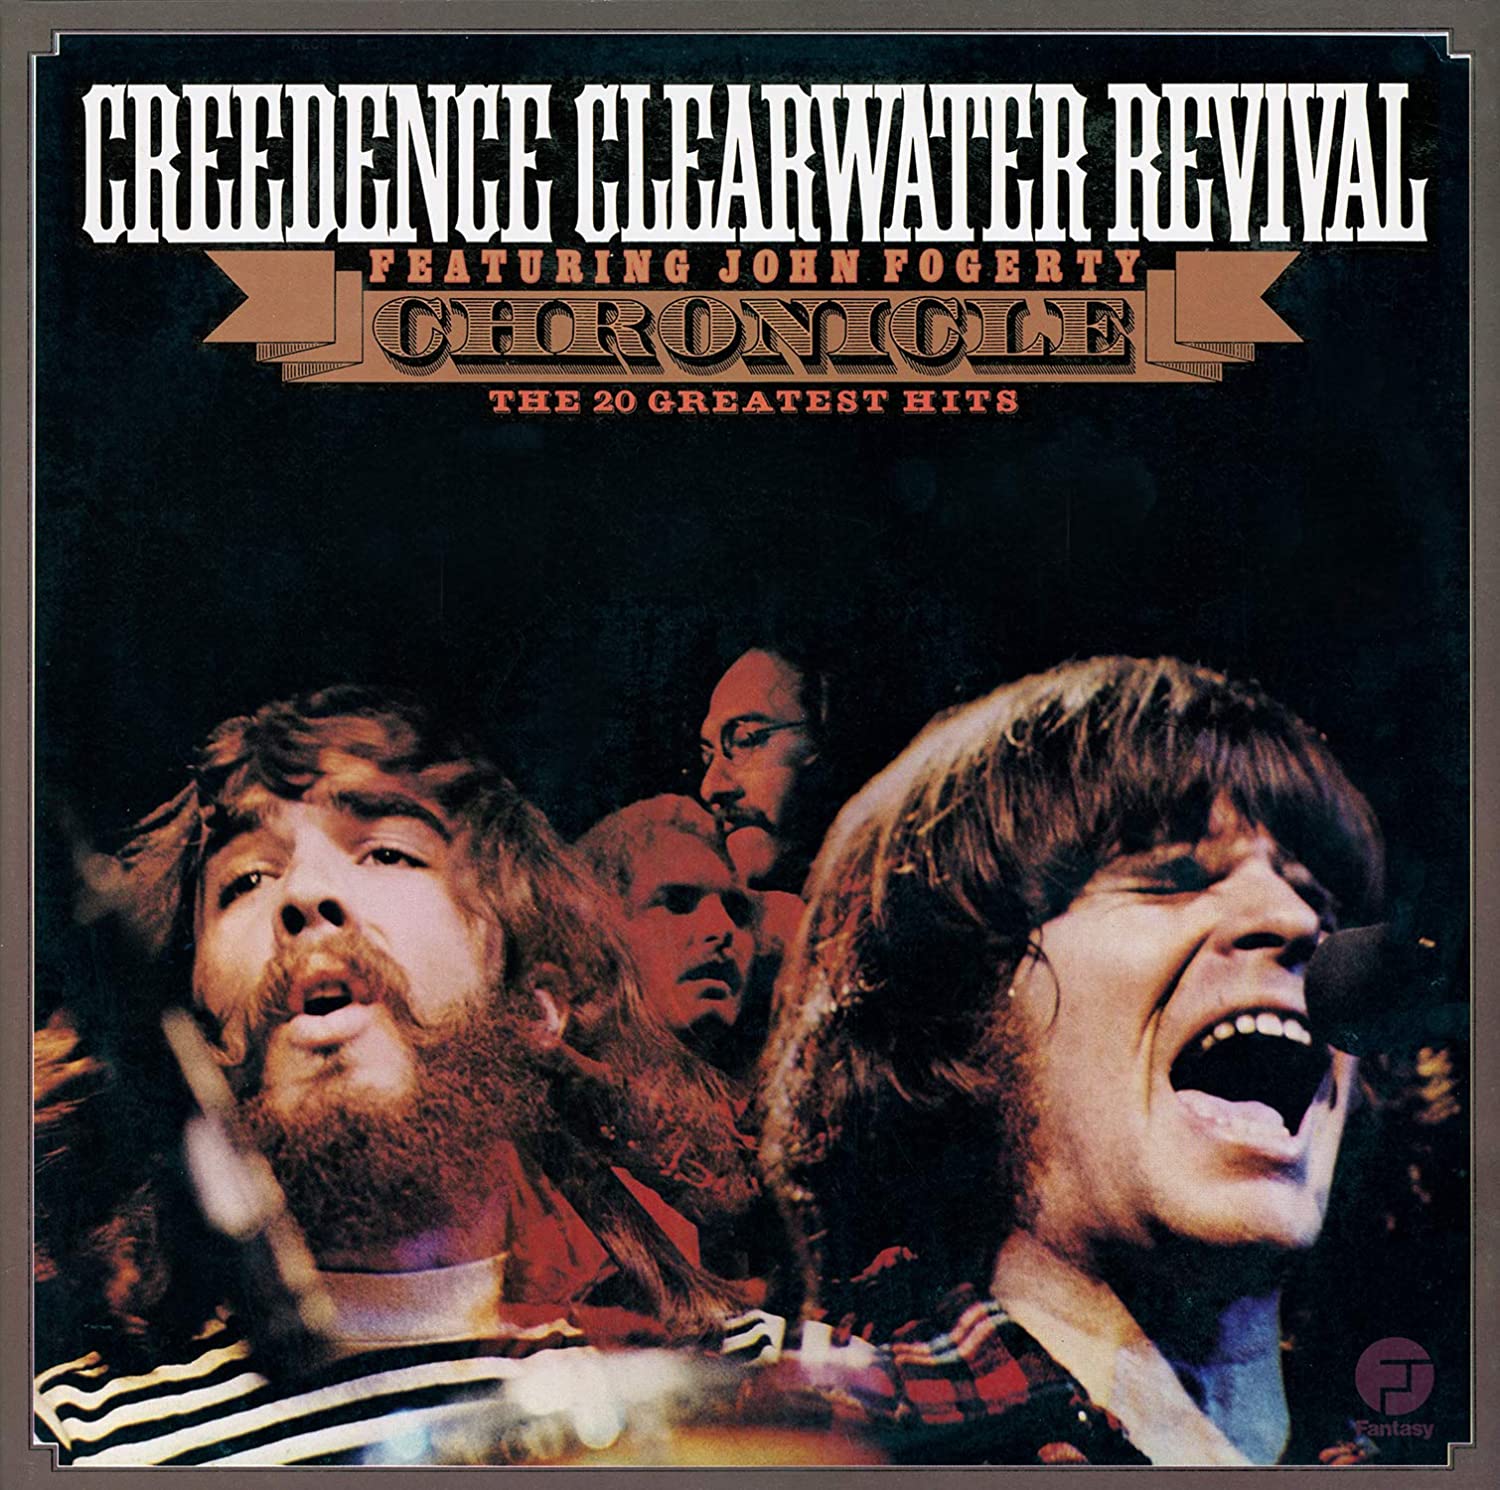 Creedence Clearwater Revival - Chronicle: The 20 Greatest Hits (Walmart Exclusive) - Rock Vinyl LP (Craft Recordings) - image 1 of 2